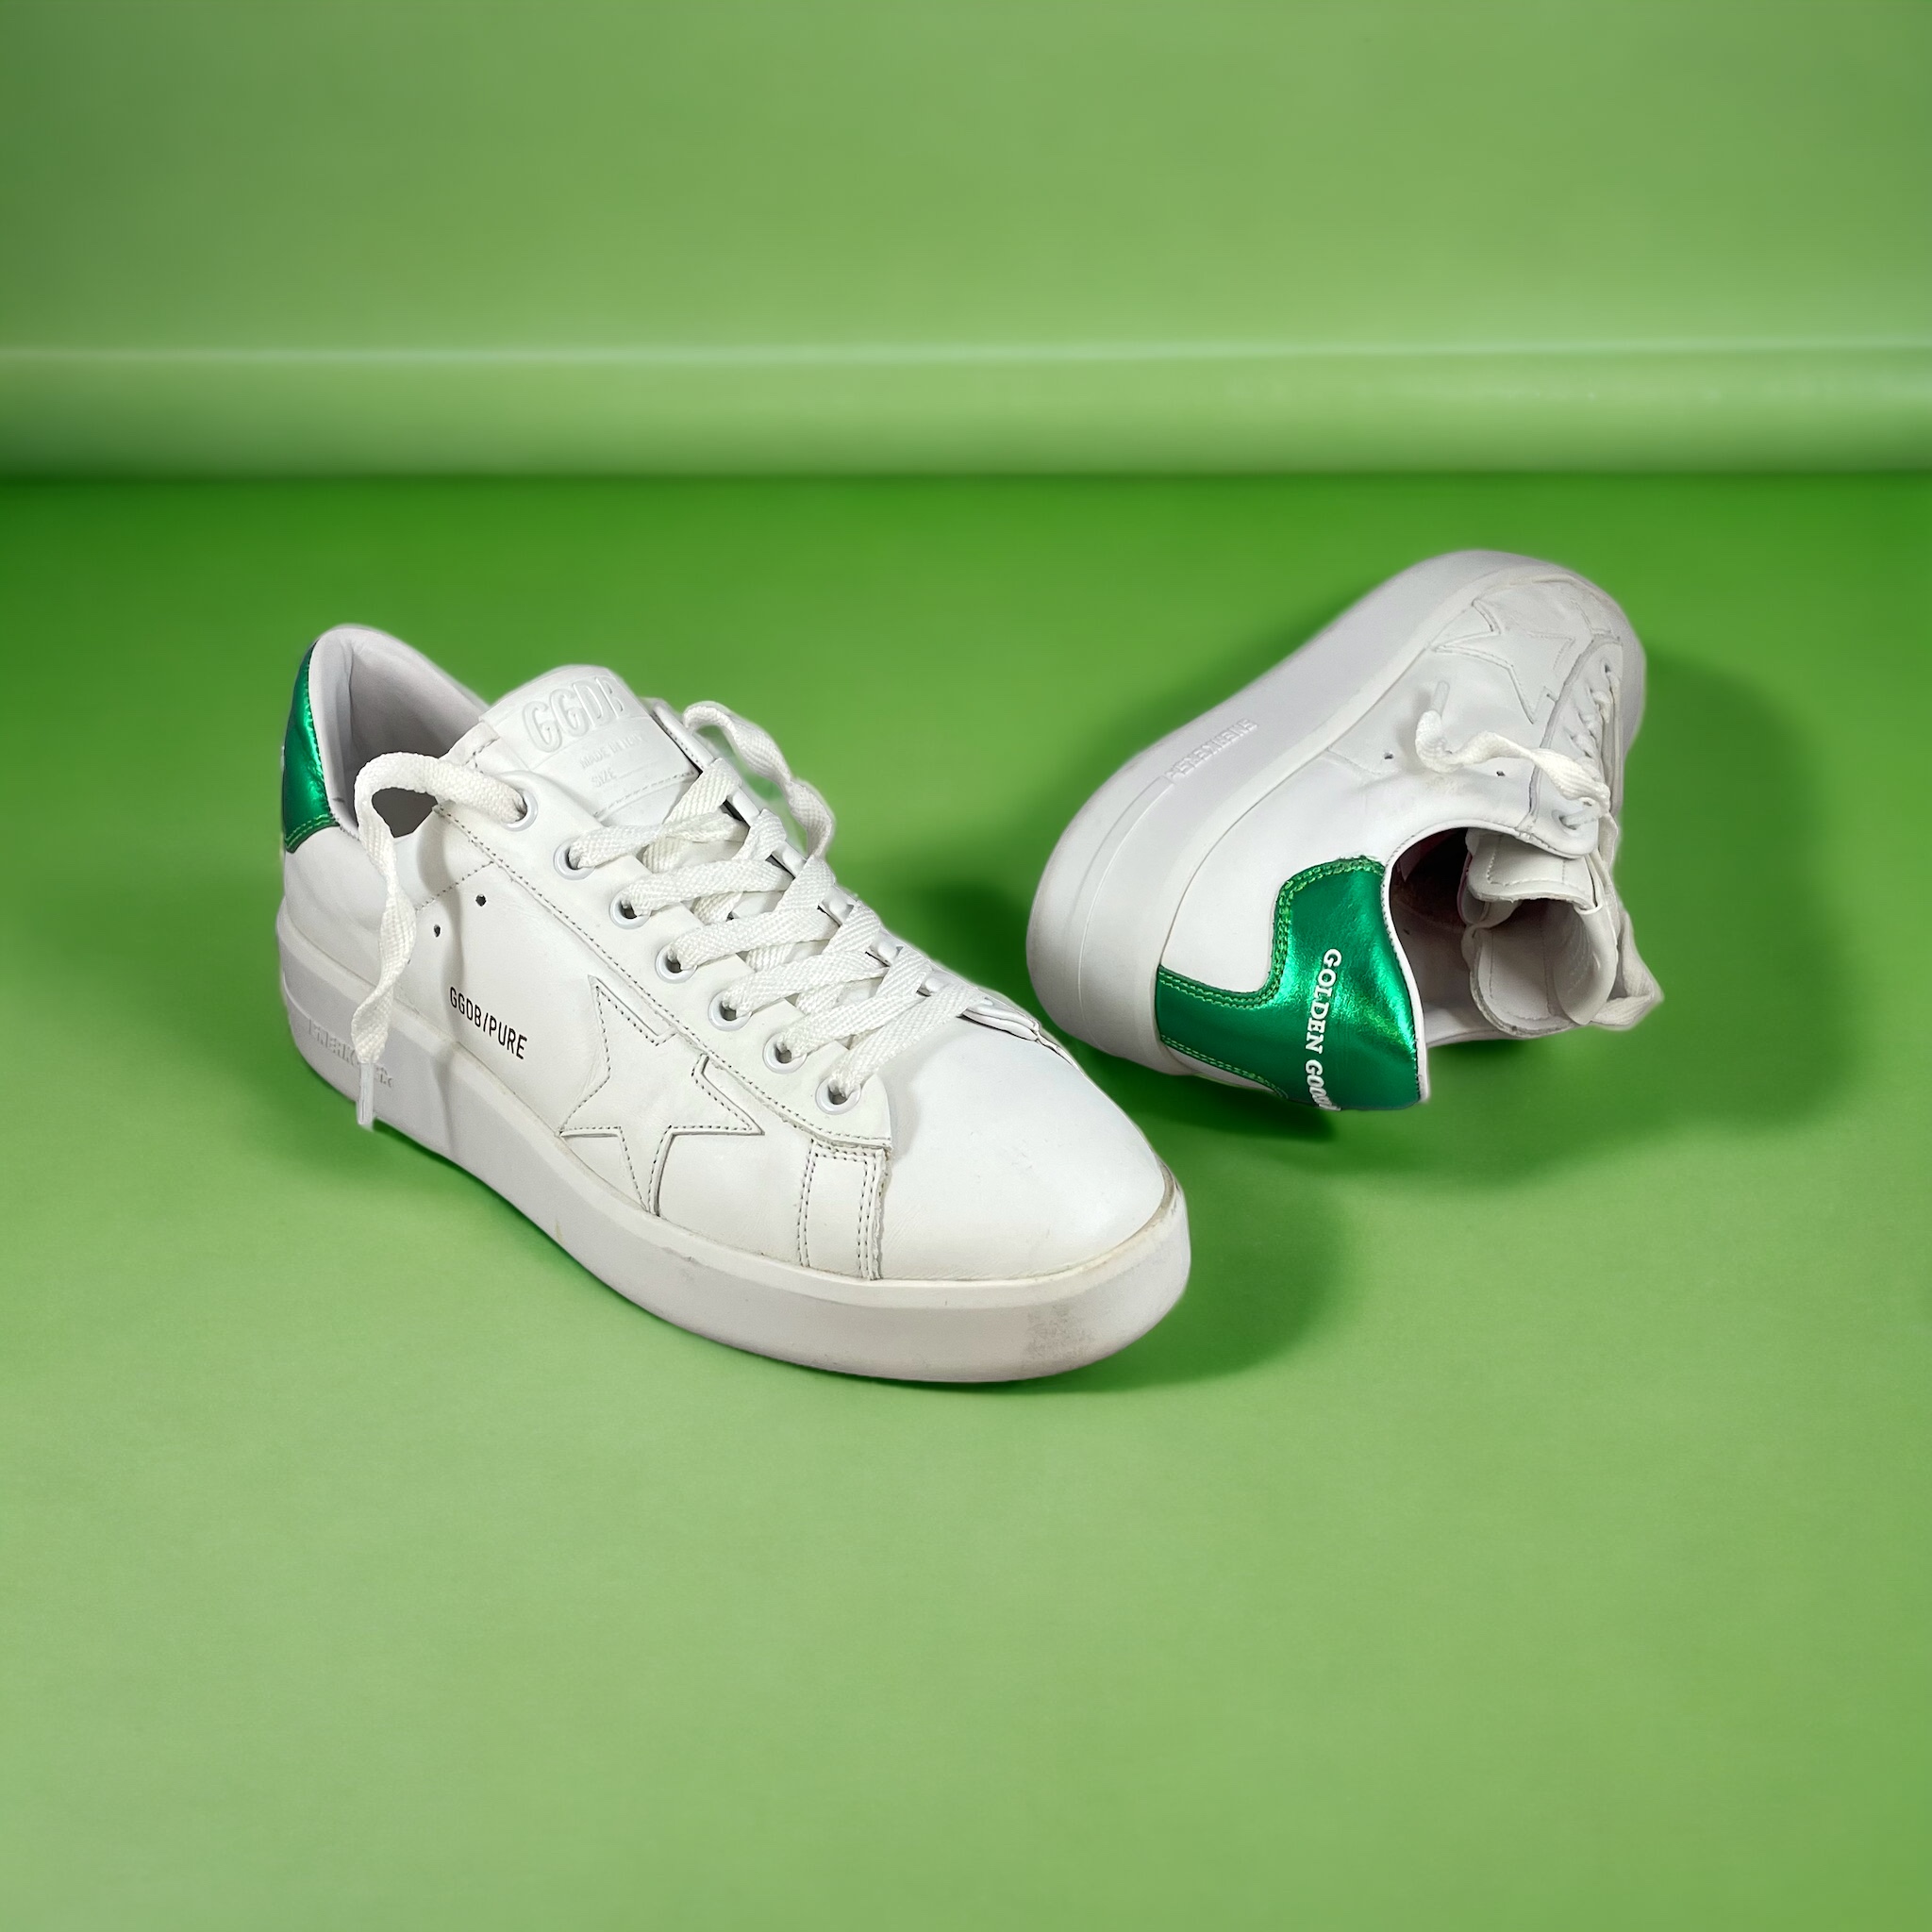 Golden Goose Pure Star Sneakers in White Green | MTYCI